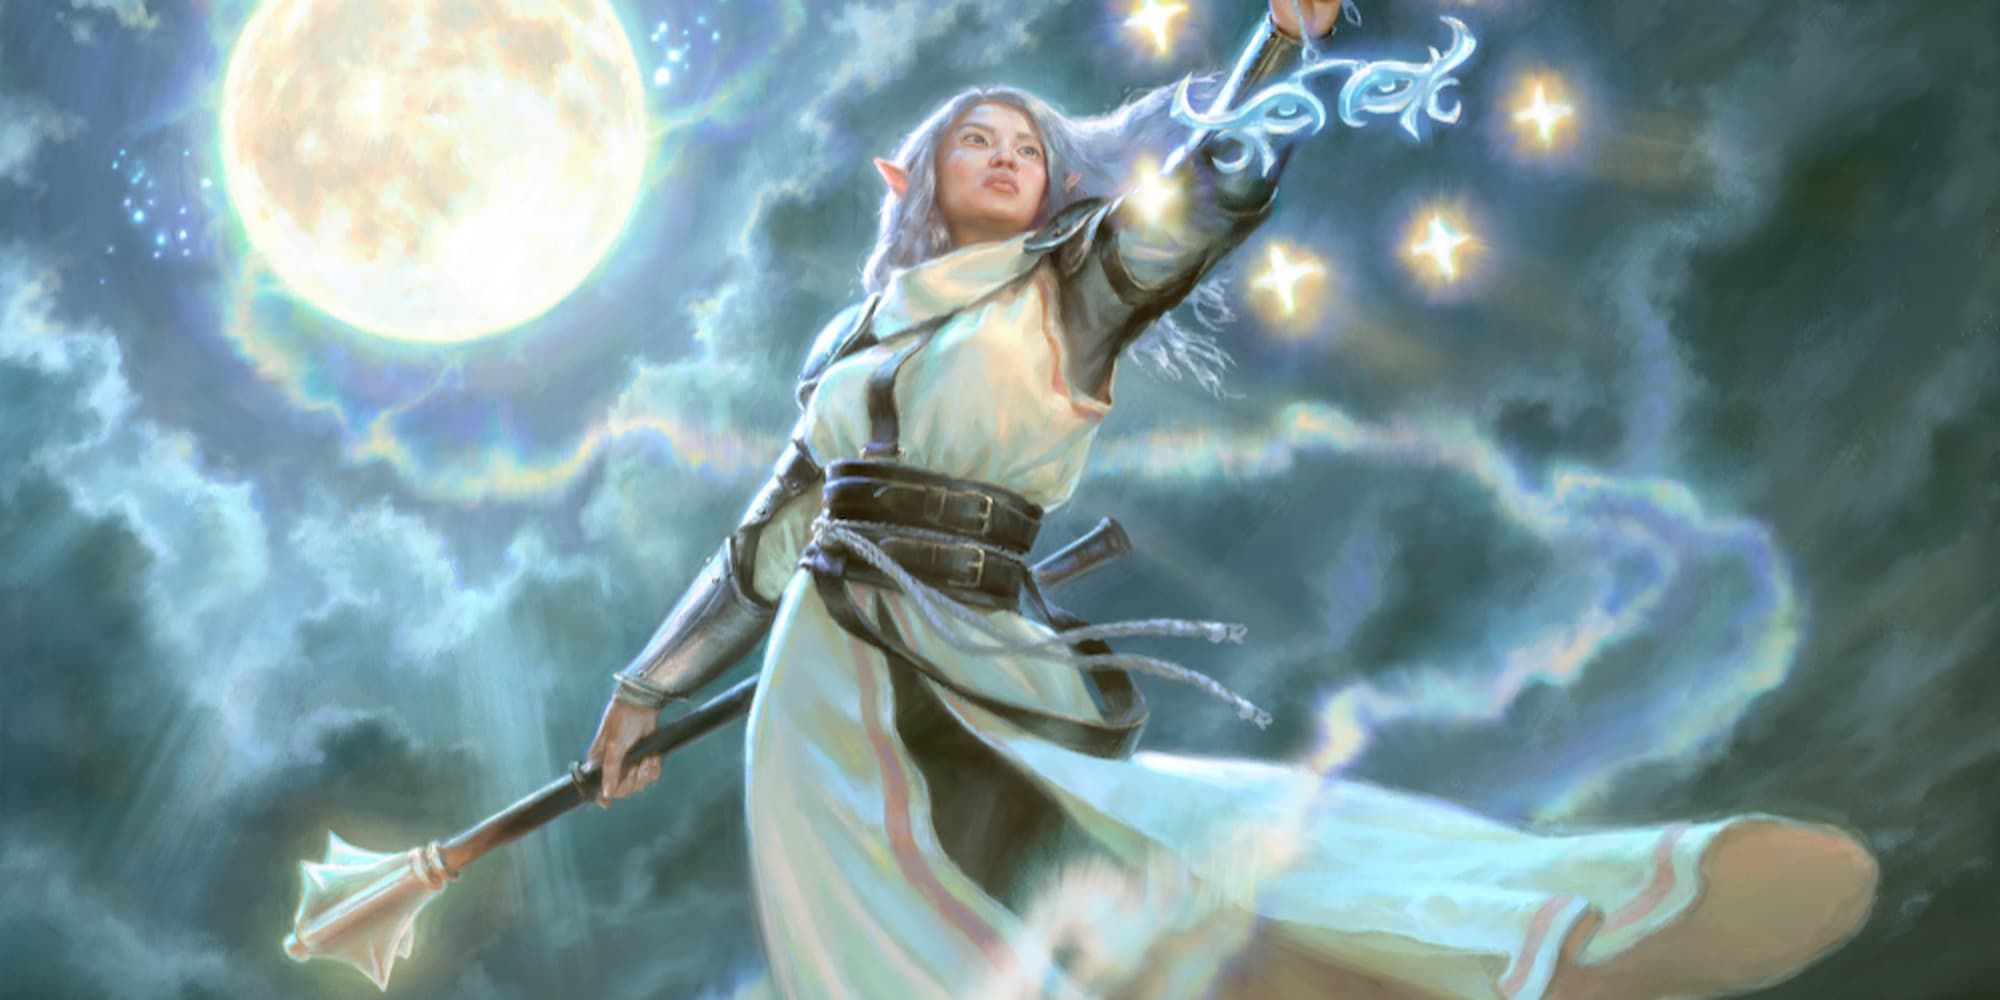 A cleric with a mace and casting a spell, lit by a full moon behind them